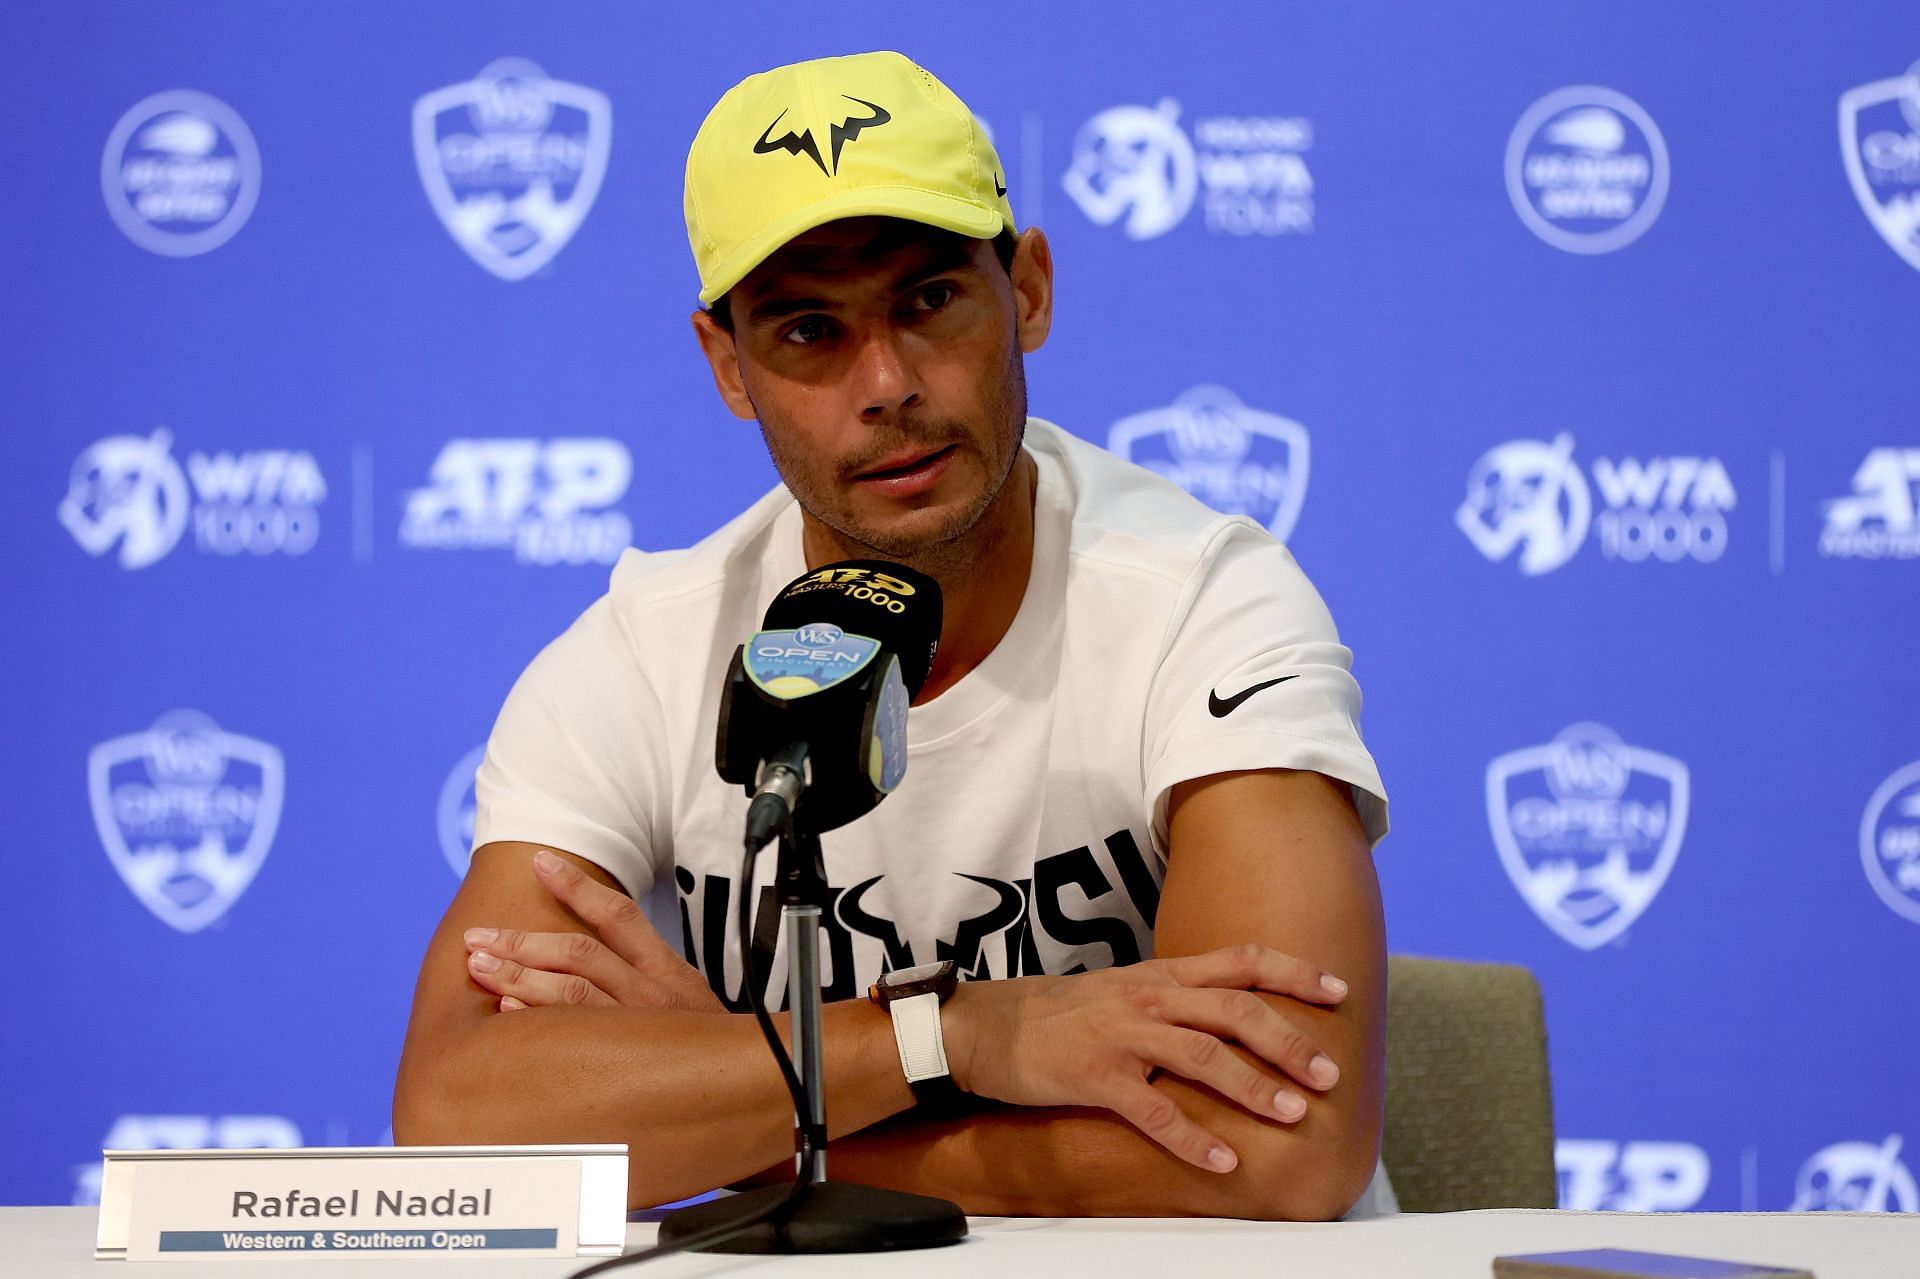 Rafael Nadal speaking at a press conference at the 2022 Western &amp; Southern Open